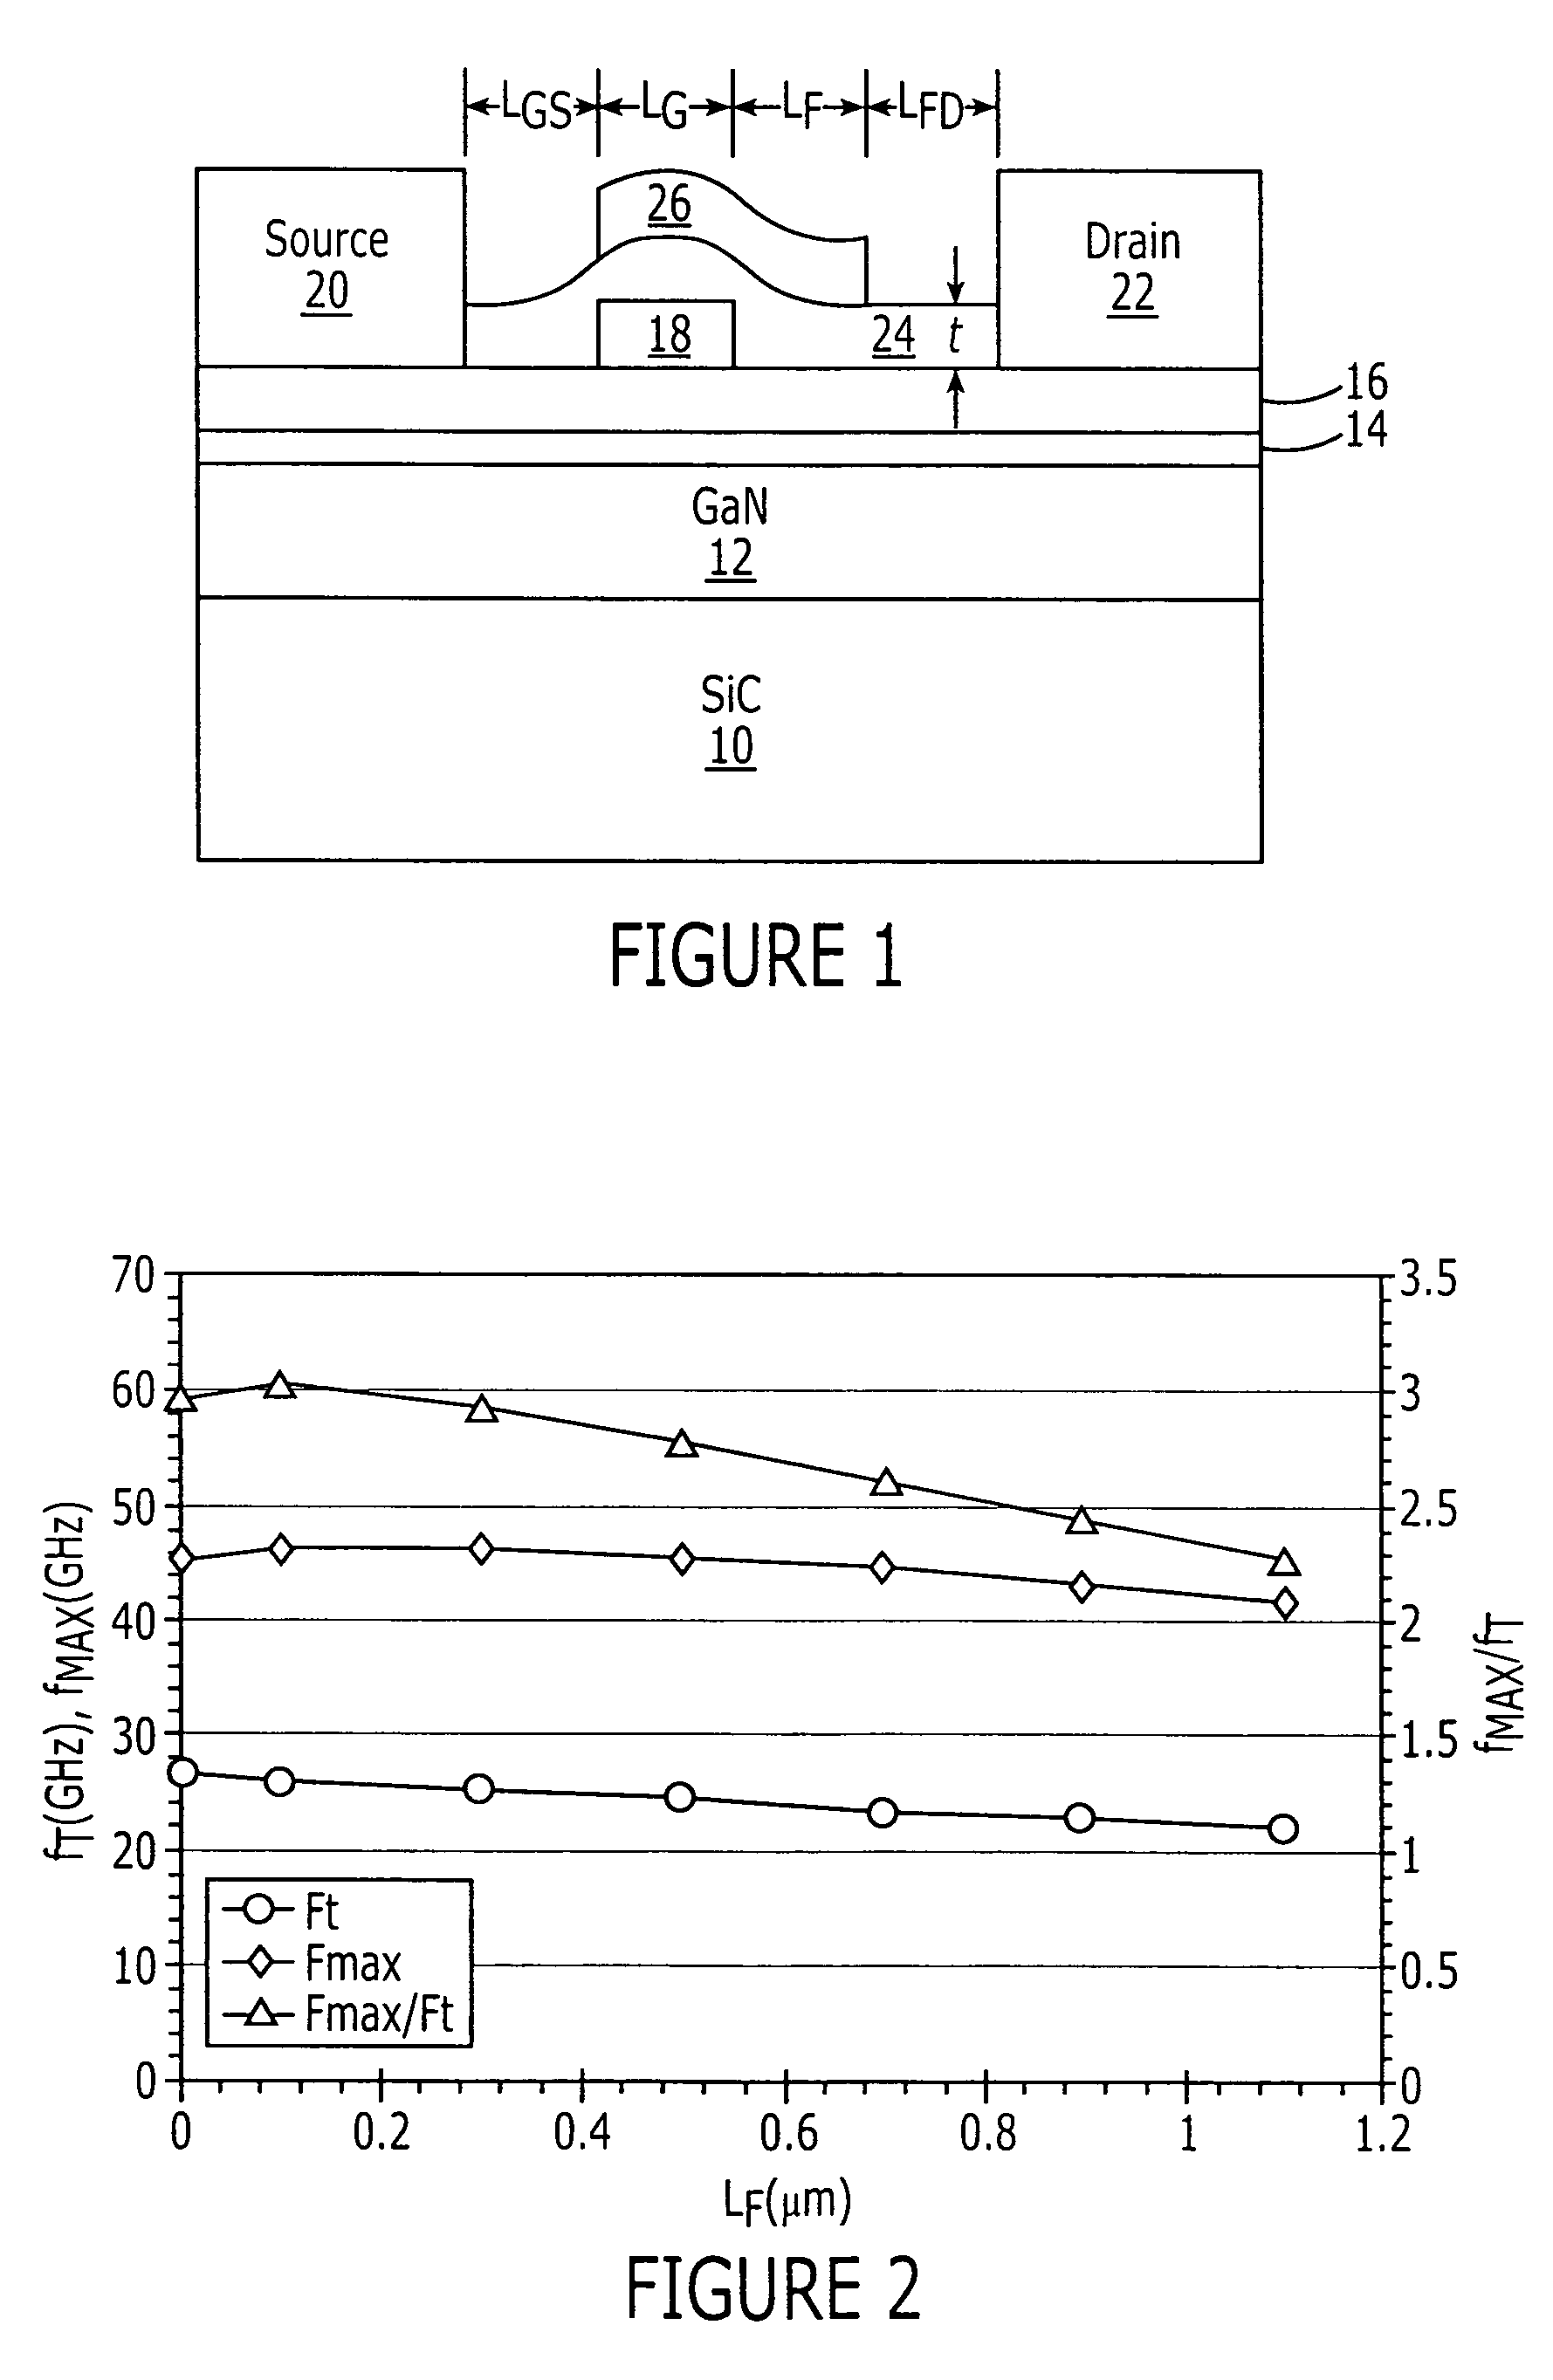 High power density and/or linearity transistors